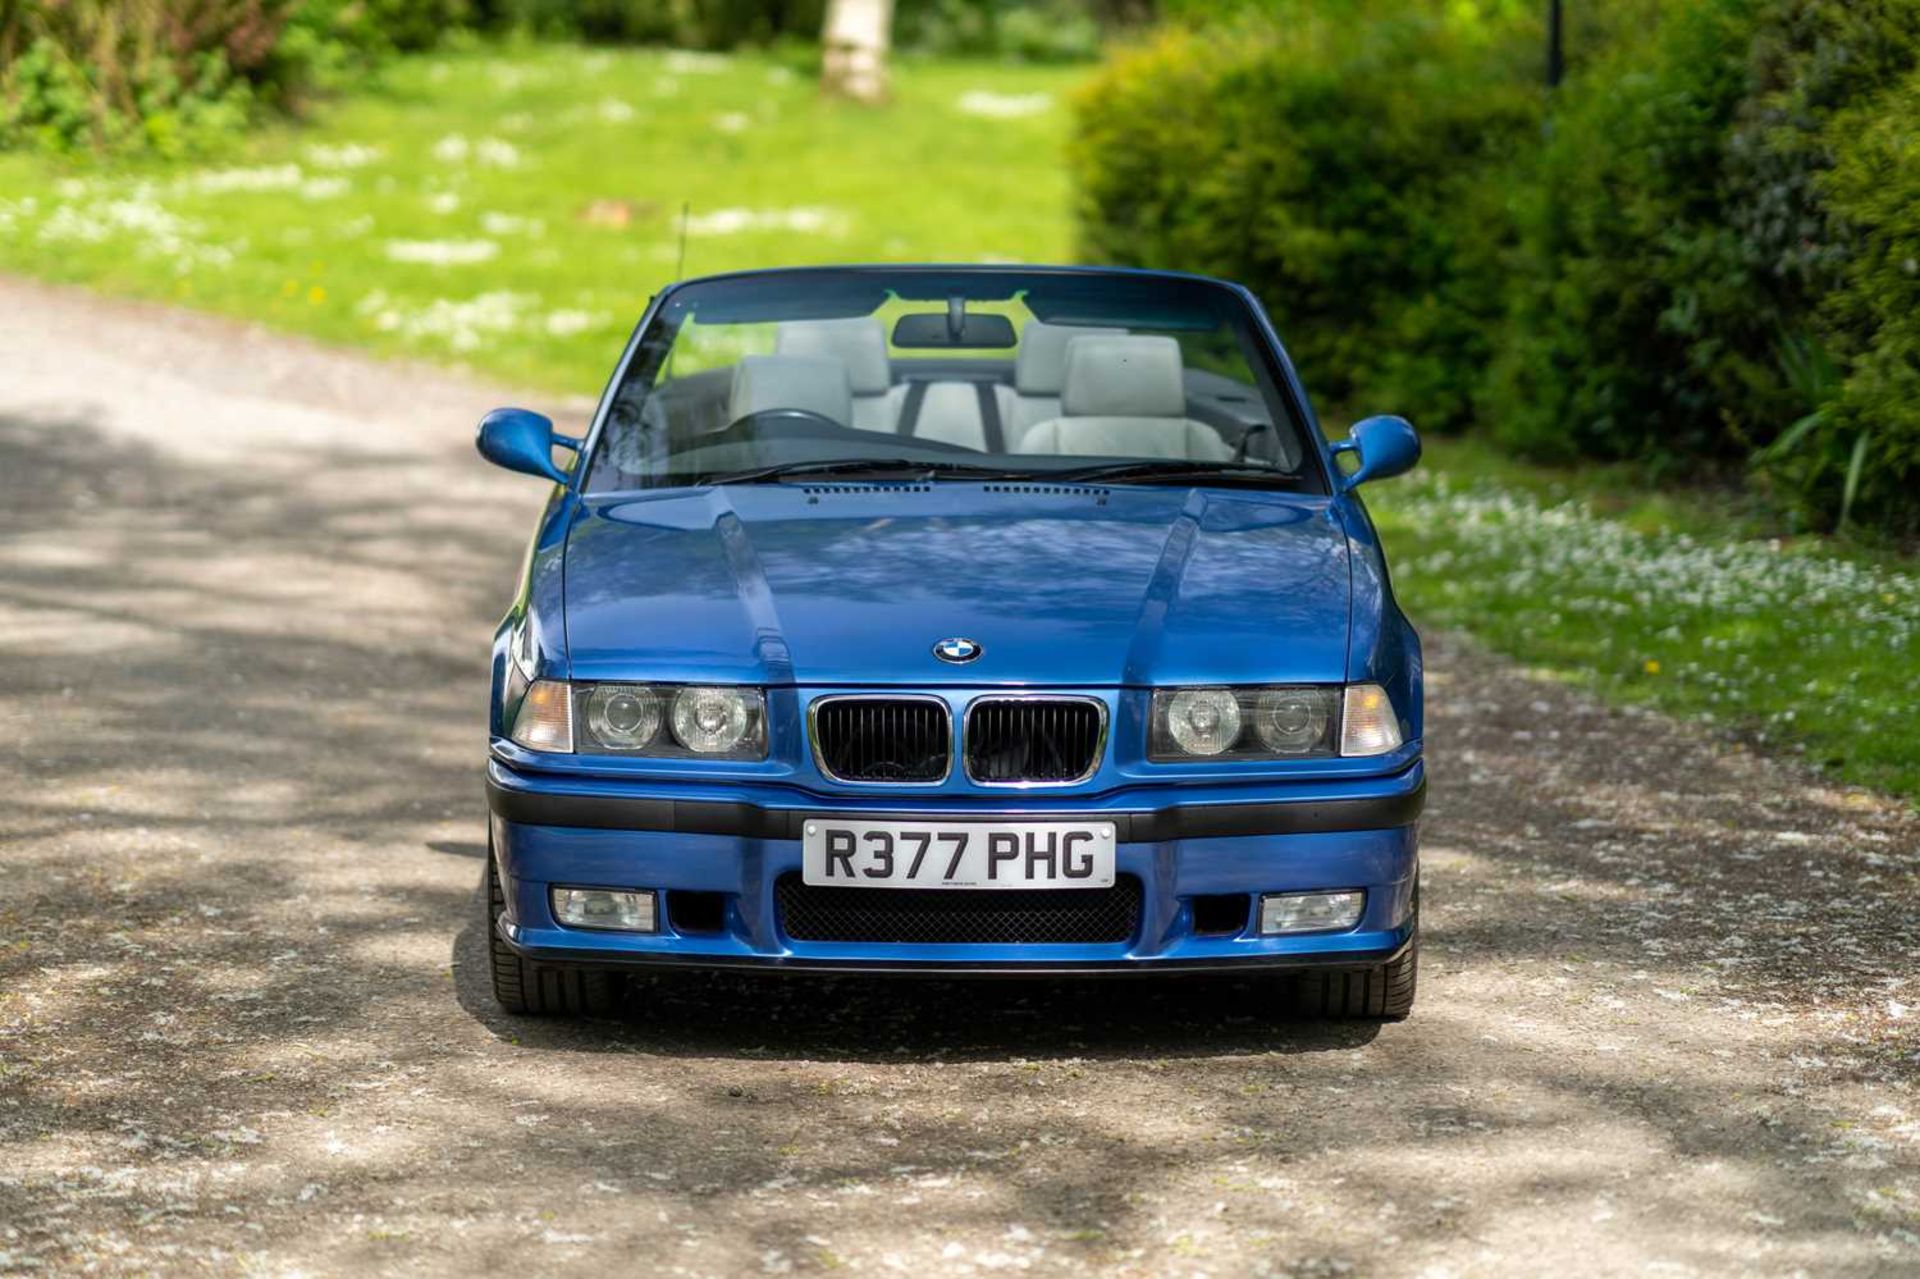 1998 BMW M3 Evolution Convertible Only 54,000 miles and full service history - Image 84 of 89